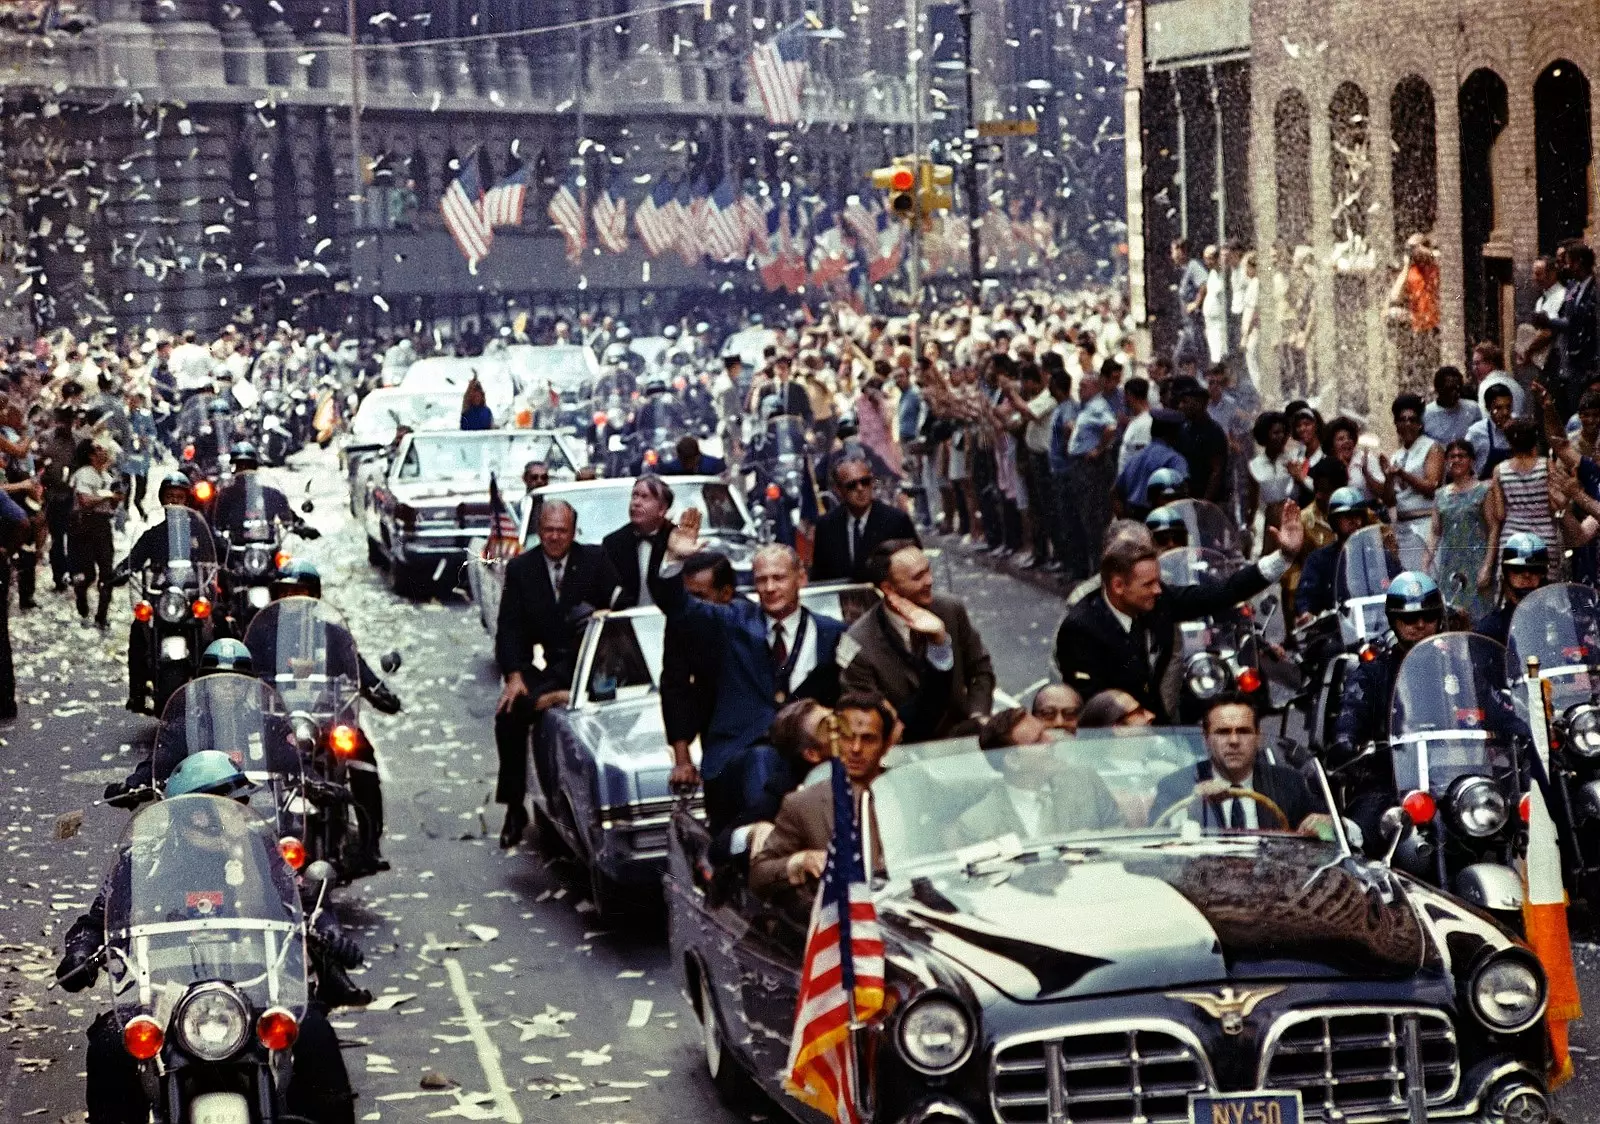 Ticker tape parade for members of the Apollo 11 mission.